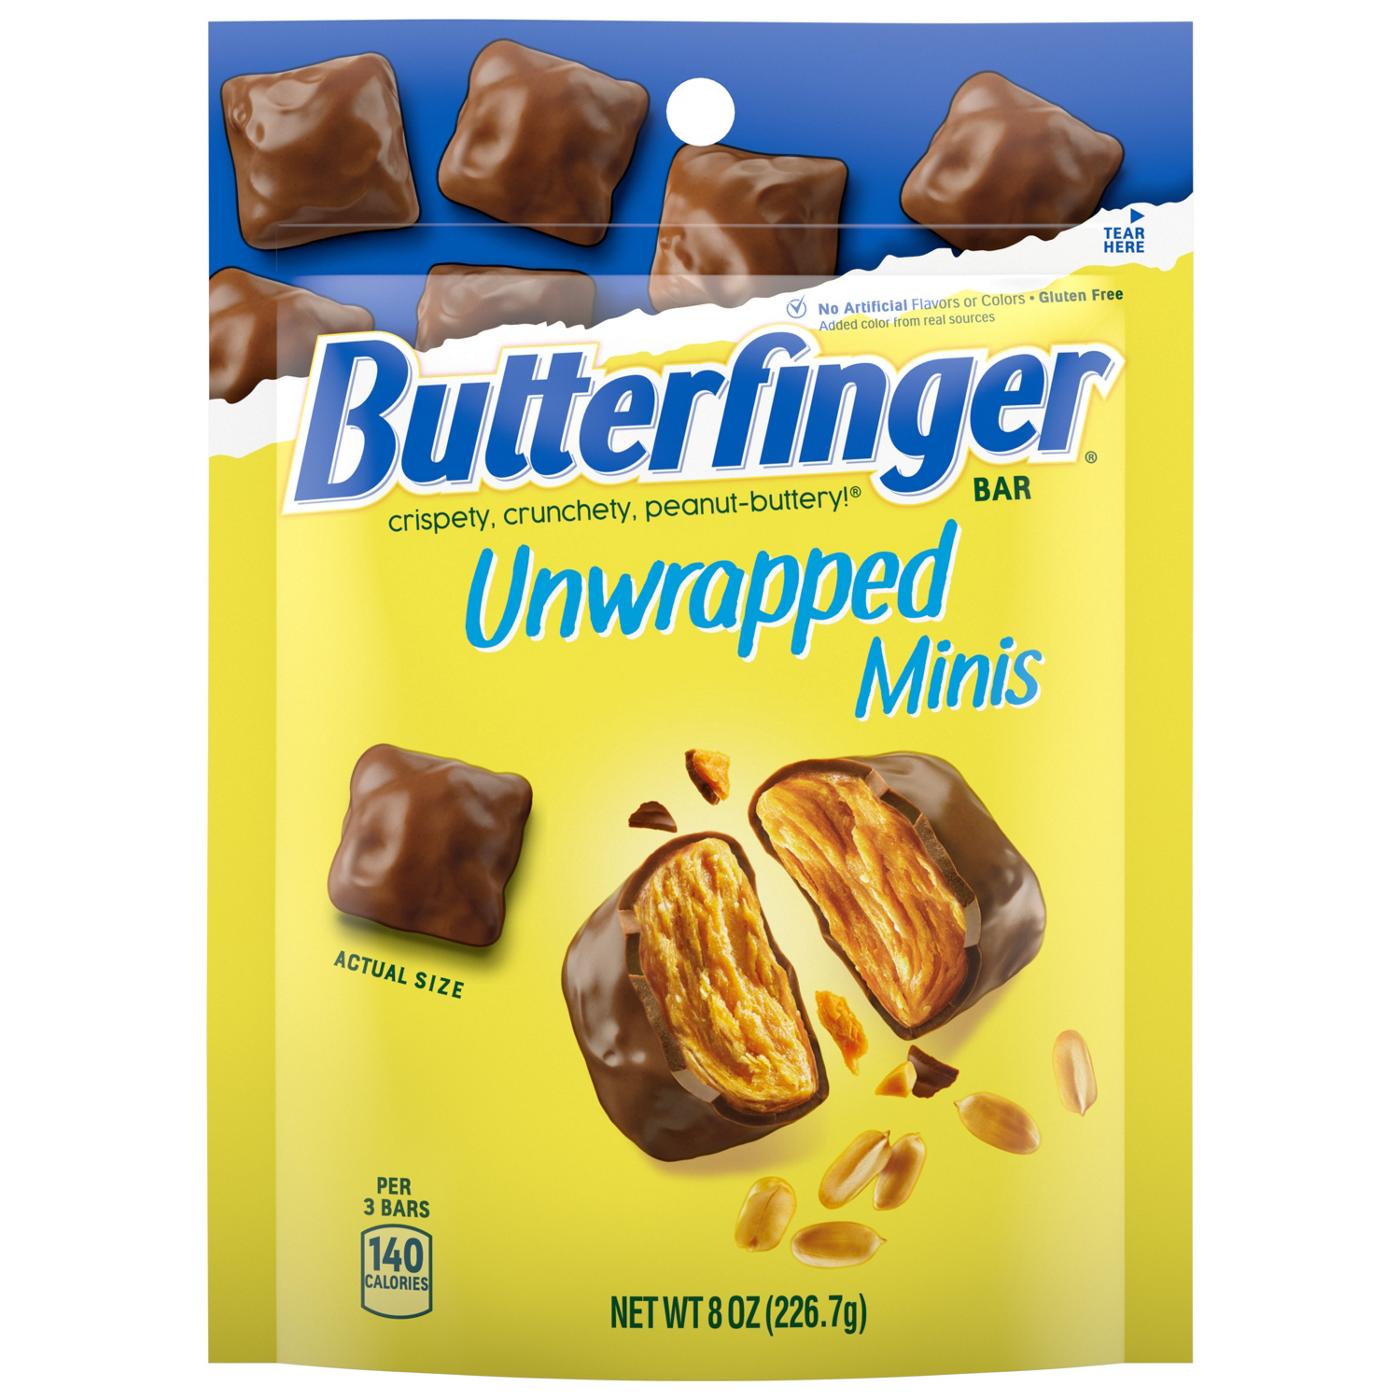 Butterfinger Unwrapped Minis Candy Bars; image 1 of 7